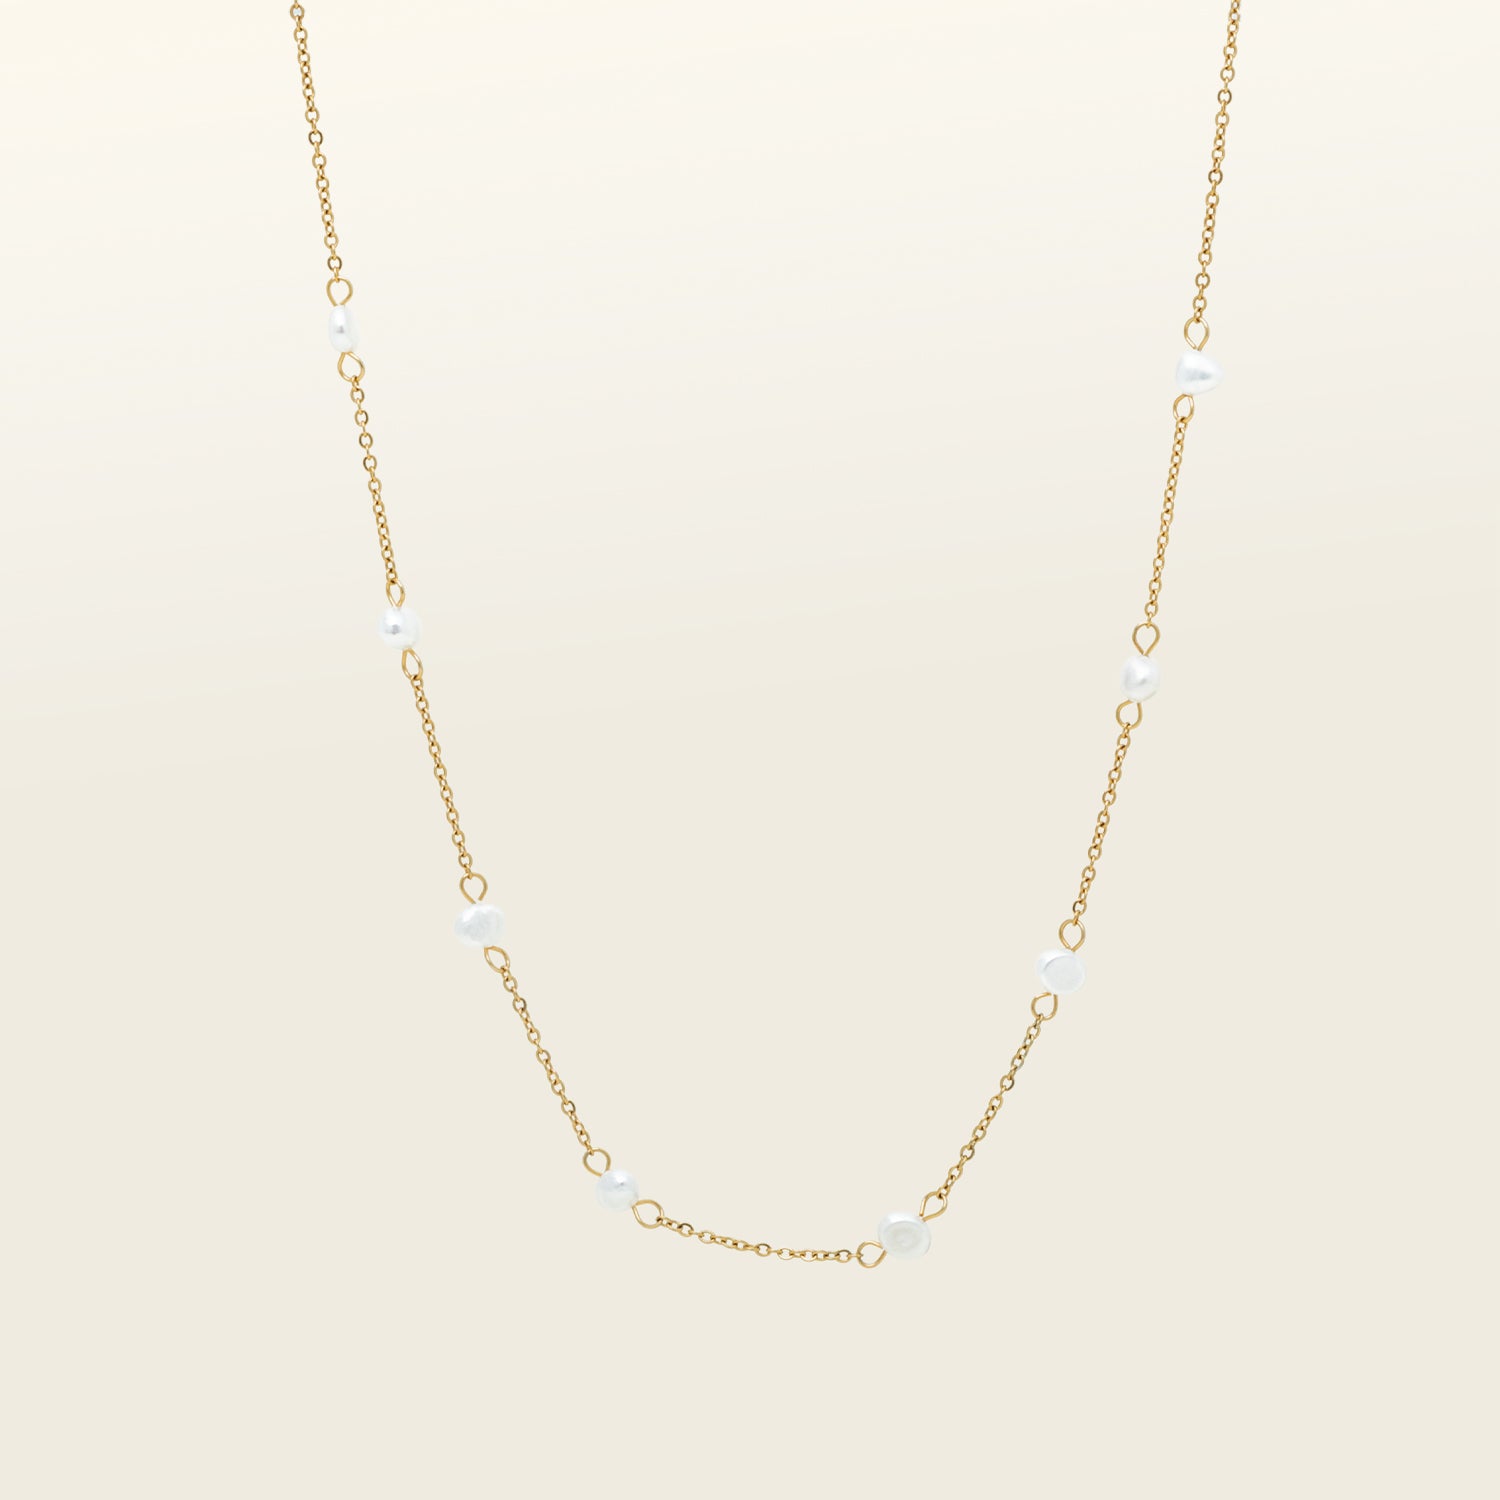 Image of the Elena Pearl Necklace is adjustable and crafted from Freshwater Pearls, 18K Gold Plated Stainless Steel, and is waterproof and hypoallergenic. Each pearl may vary slightly in size and colour due to its natural characteristics.